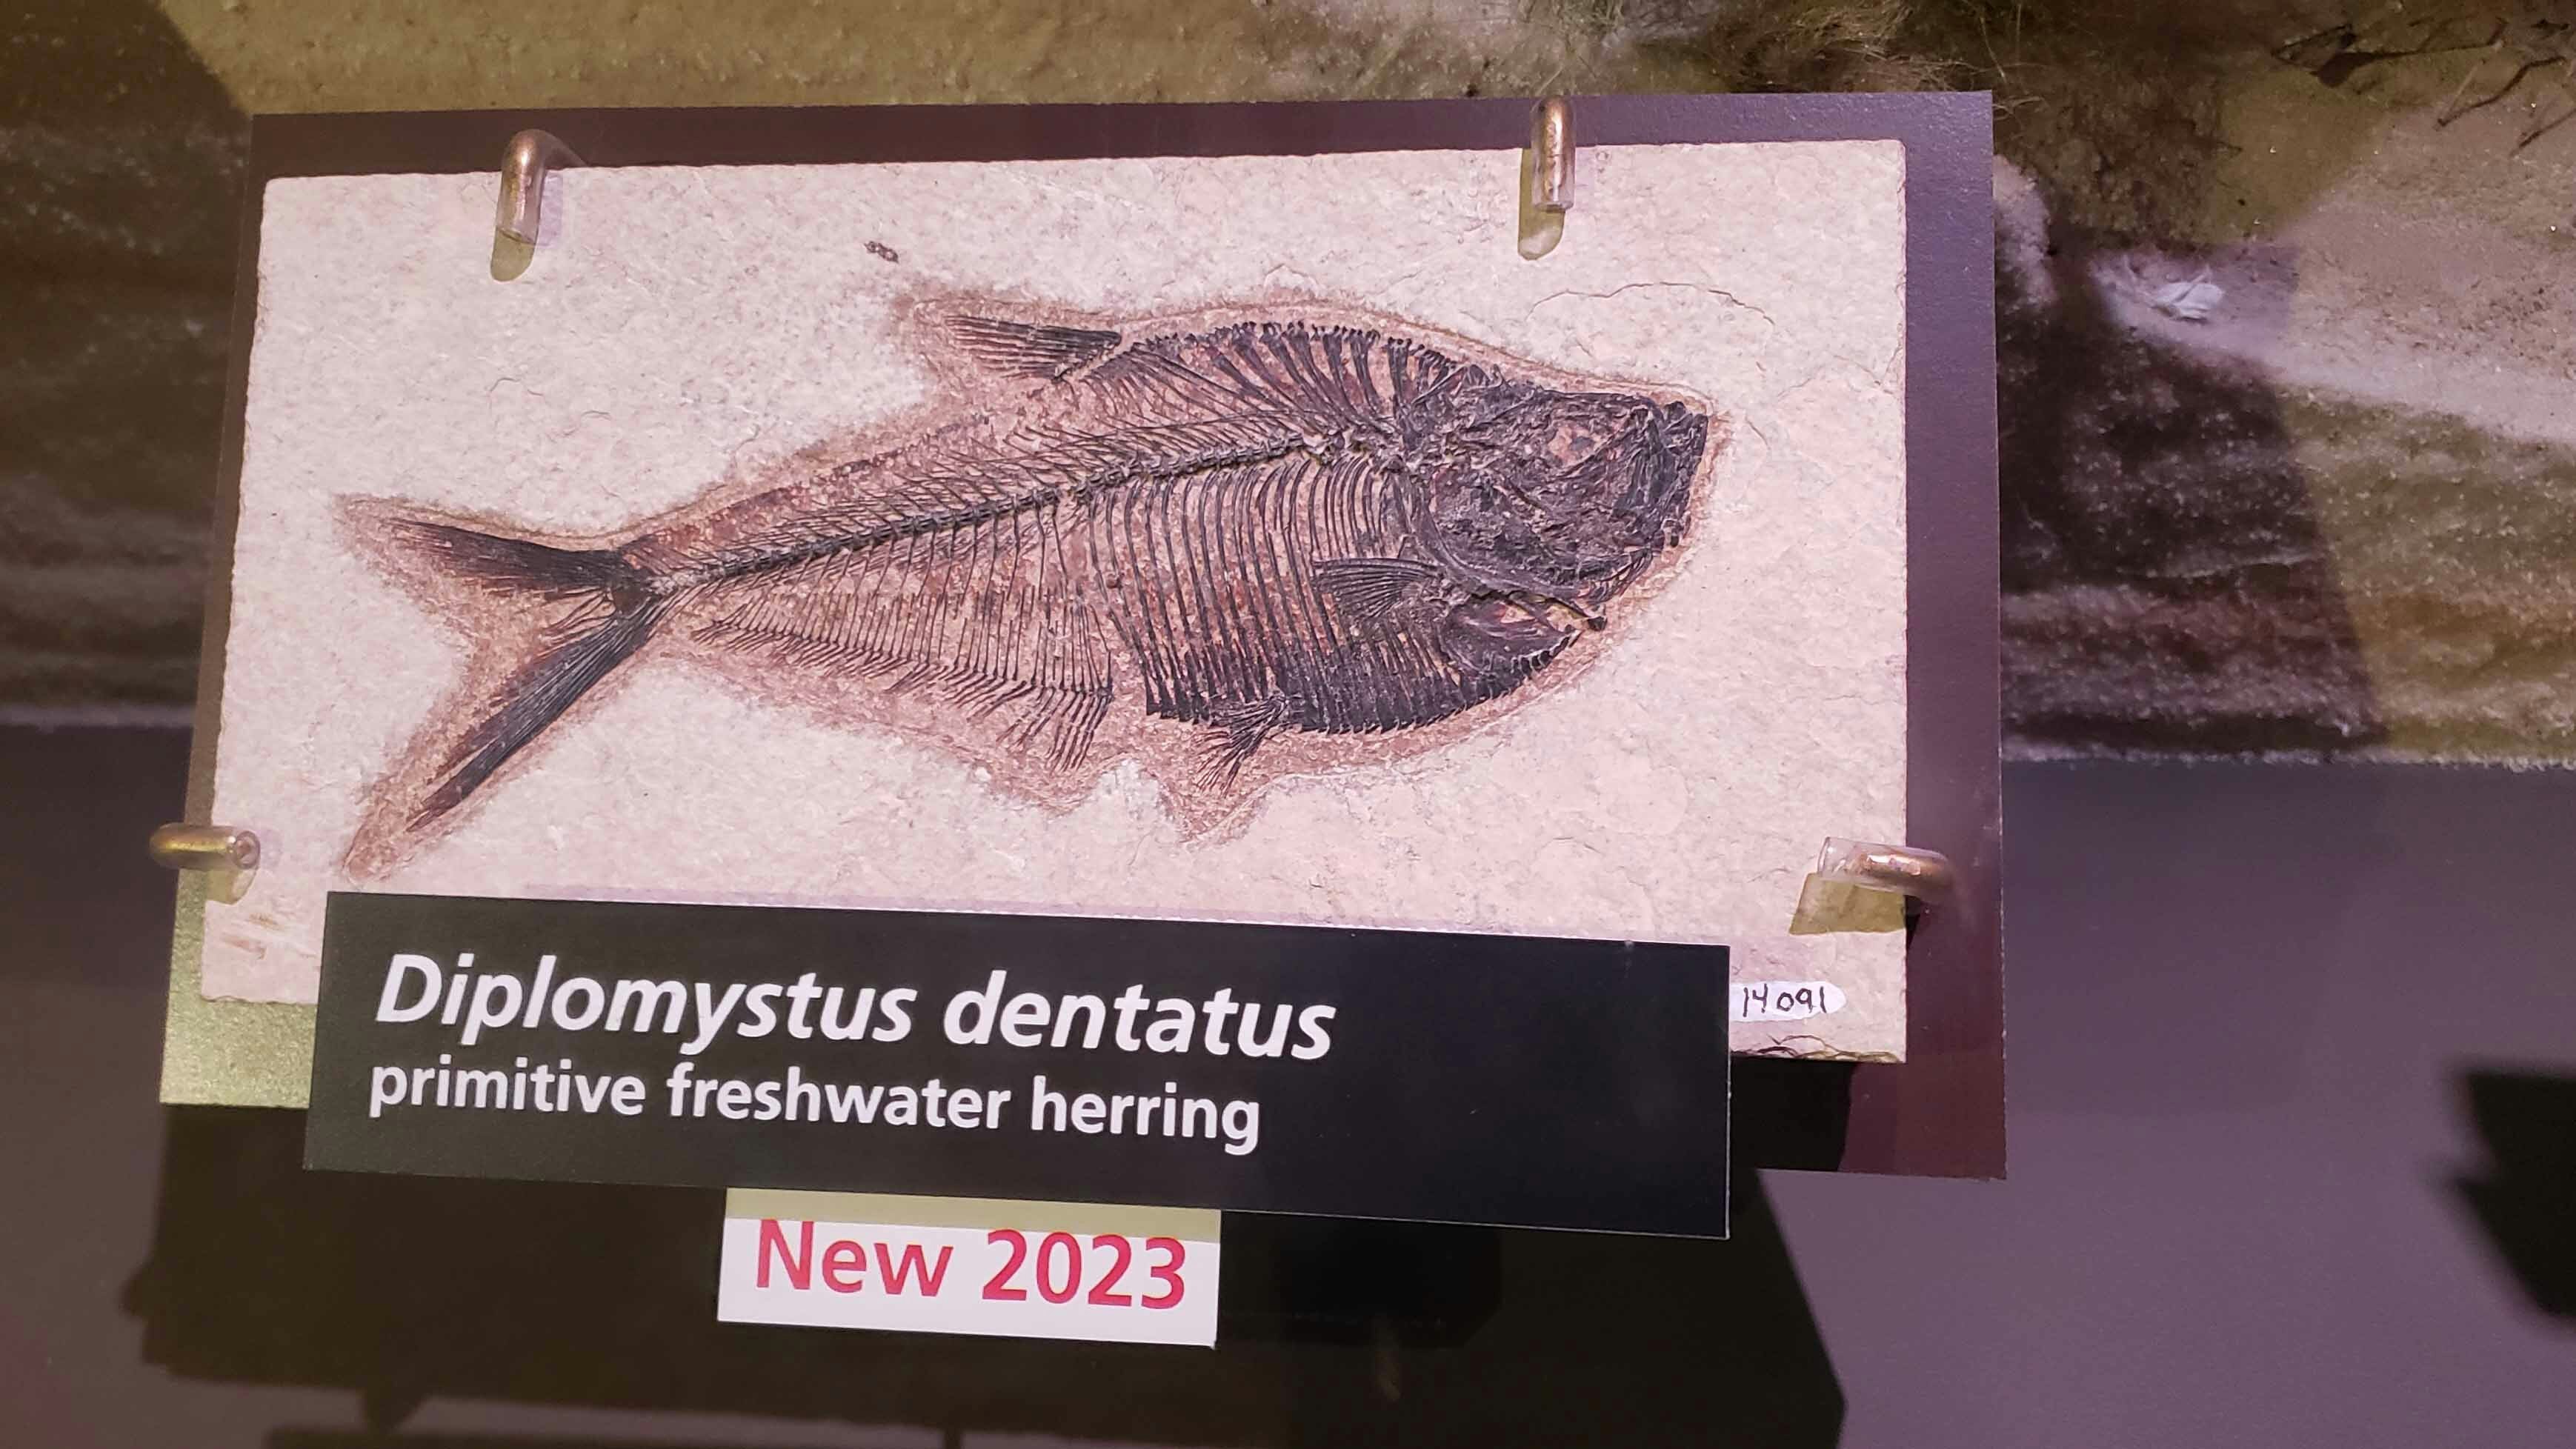 A type of freshwater herring are the most common fish fossils found in the fossil lake beds